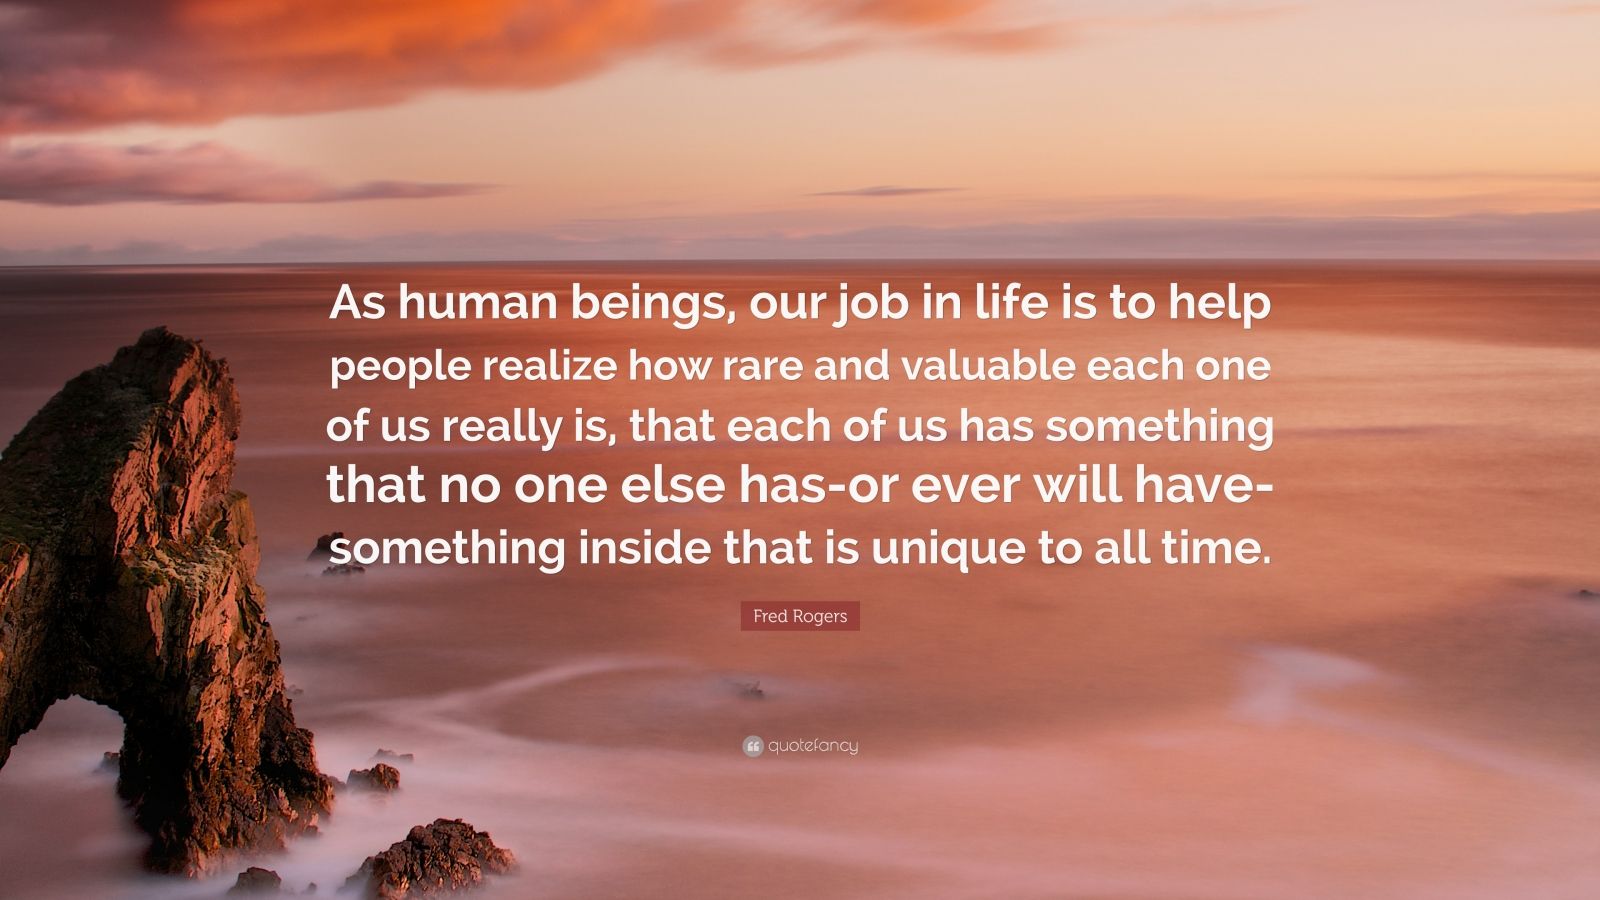 Fred Rogers Quote “As human beings, our job in life is to